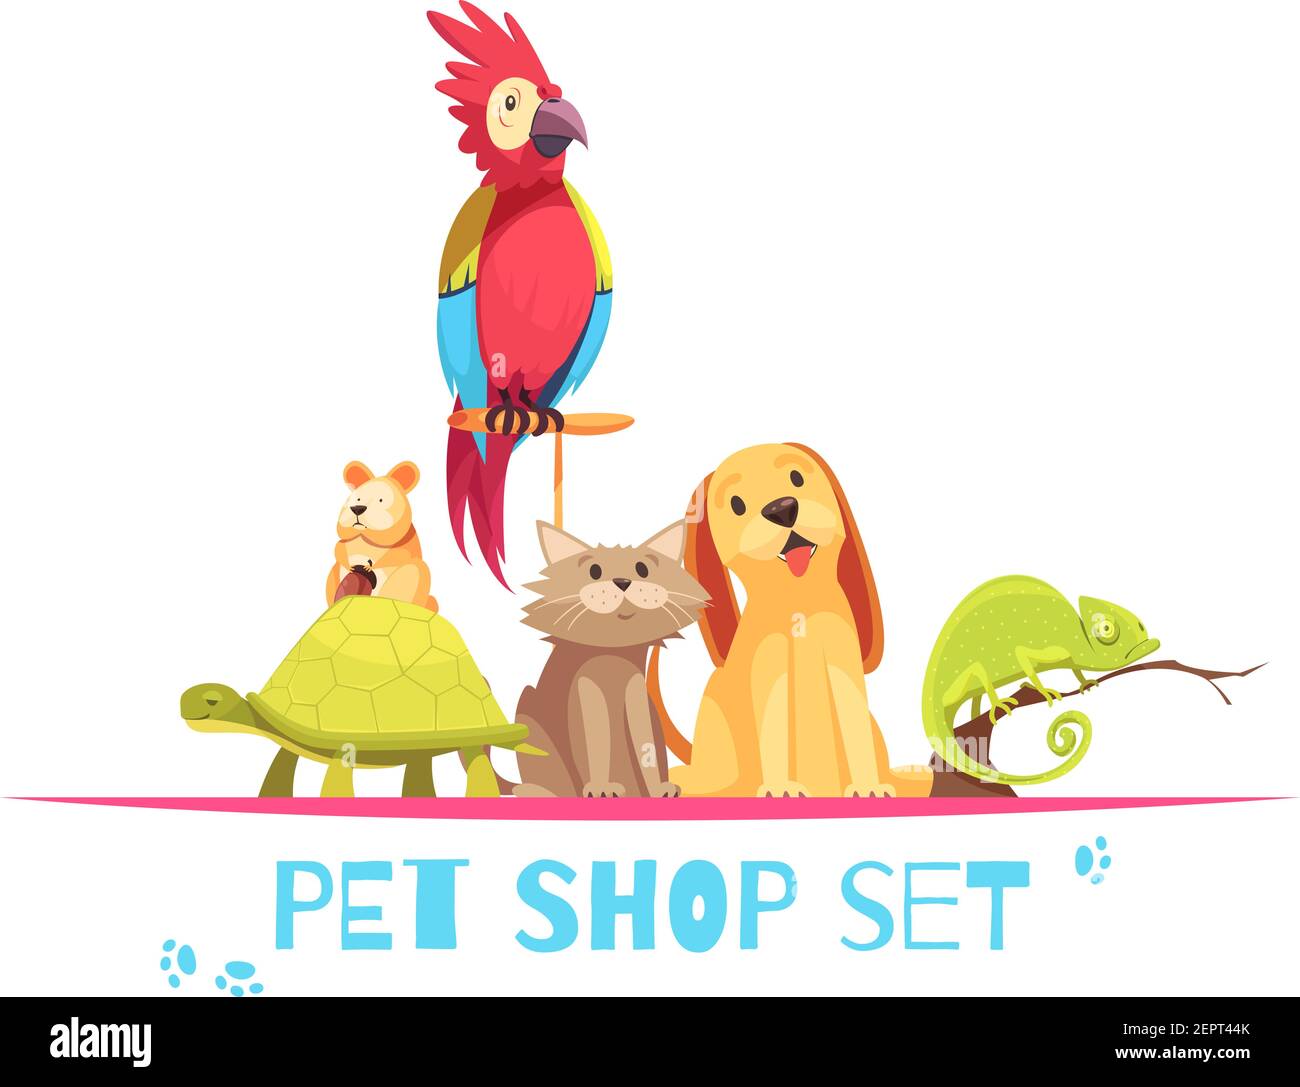 Pet shop composition with domestic animals parrot, hamster, chameleon, dog and cat on white background vector illustration Stock Vector